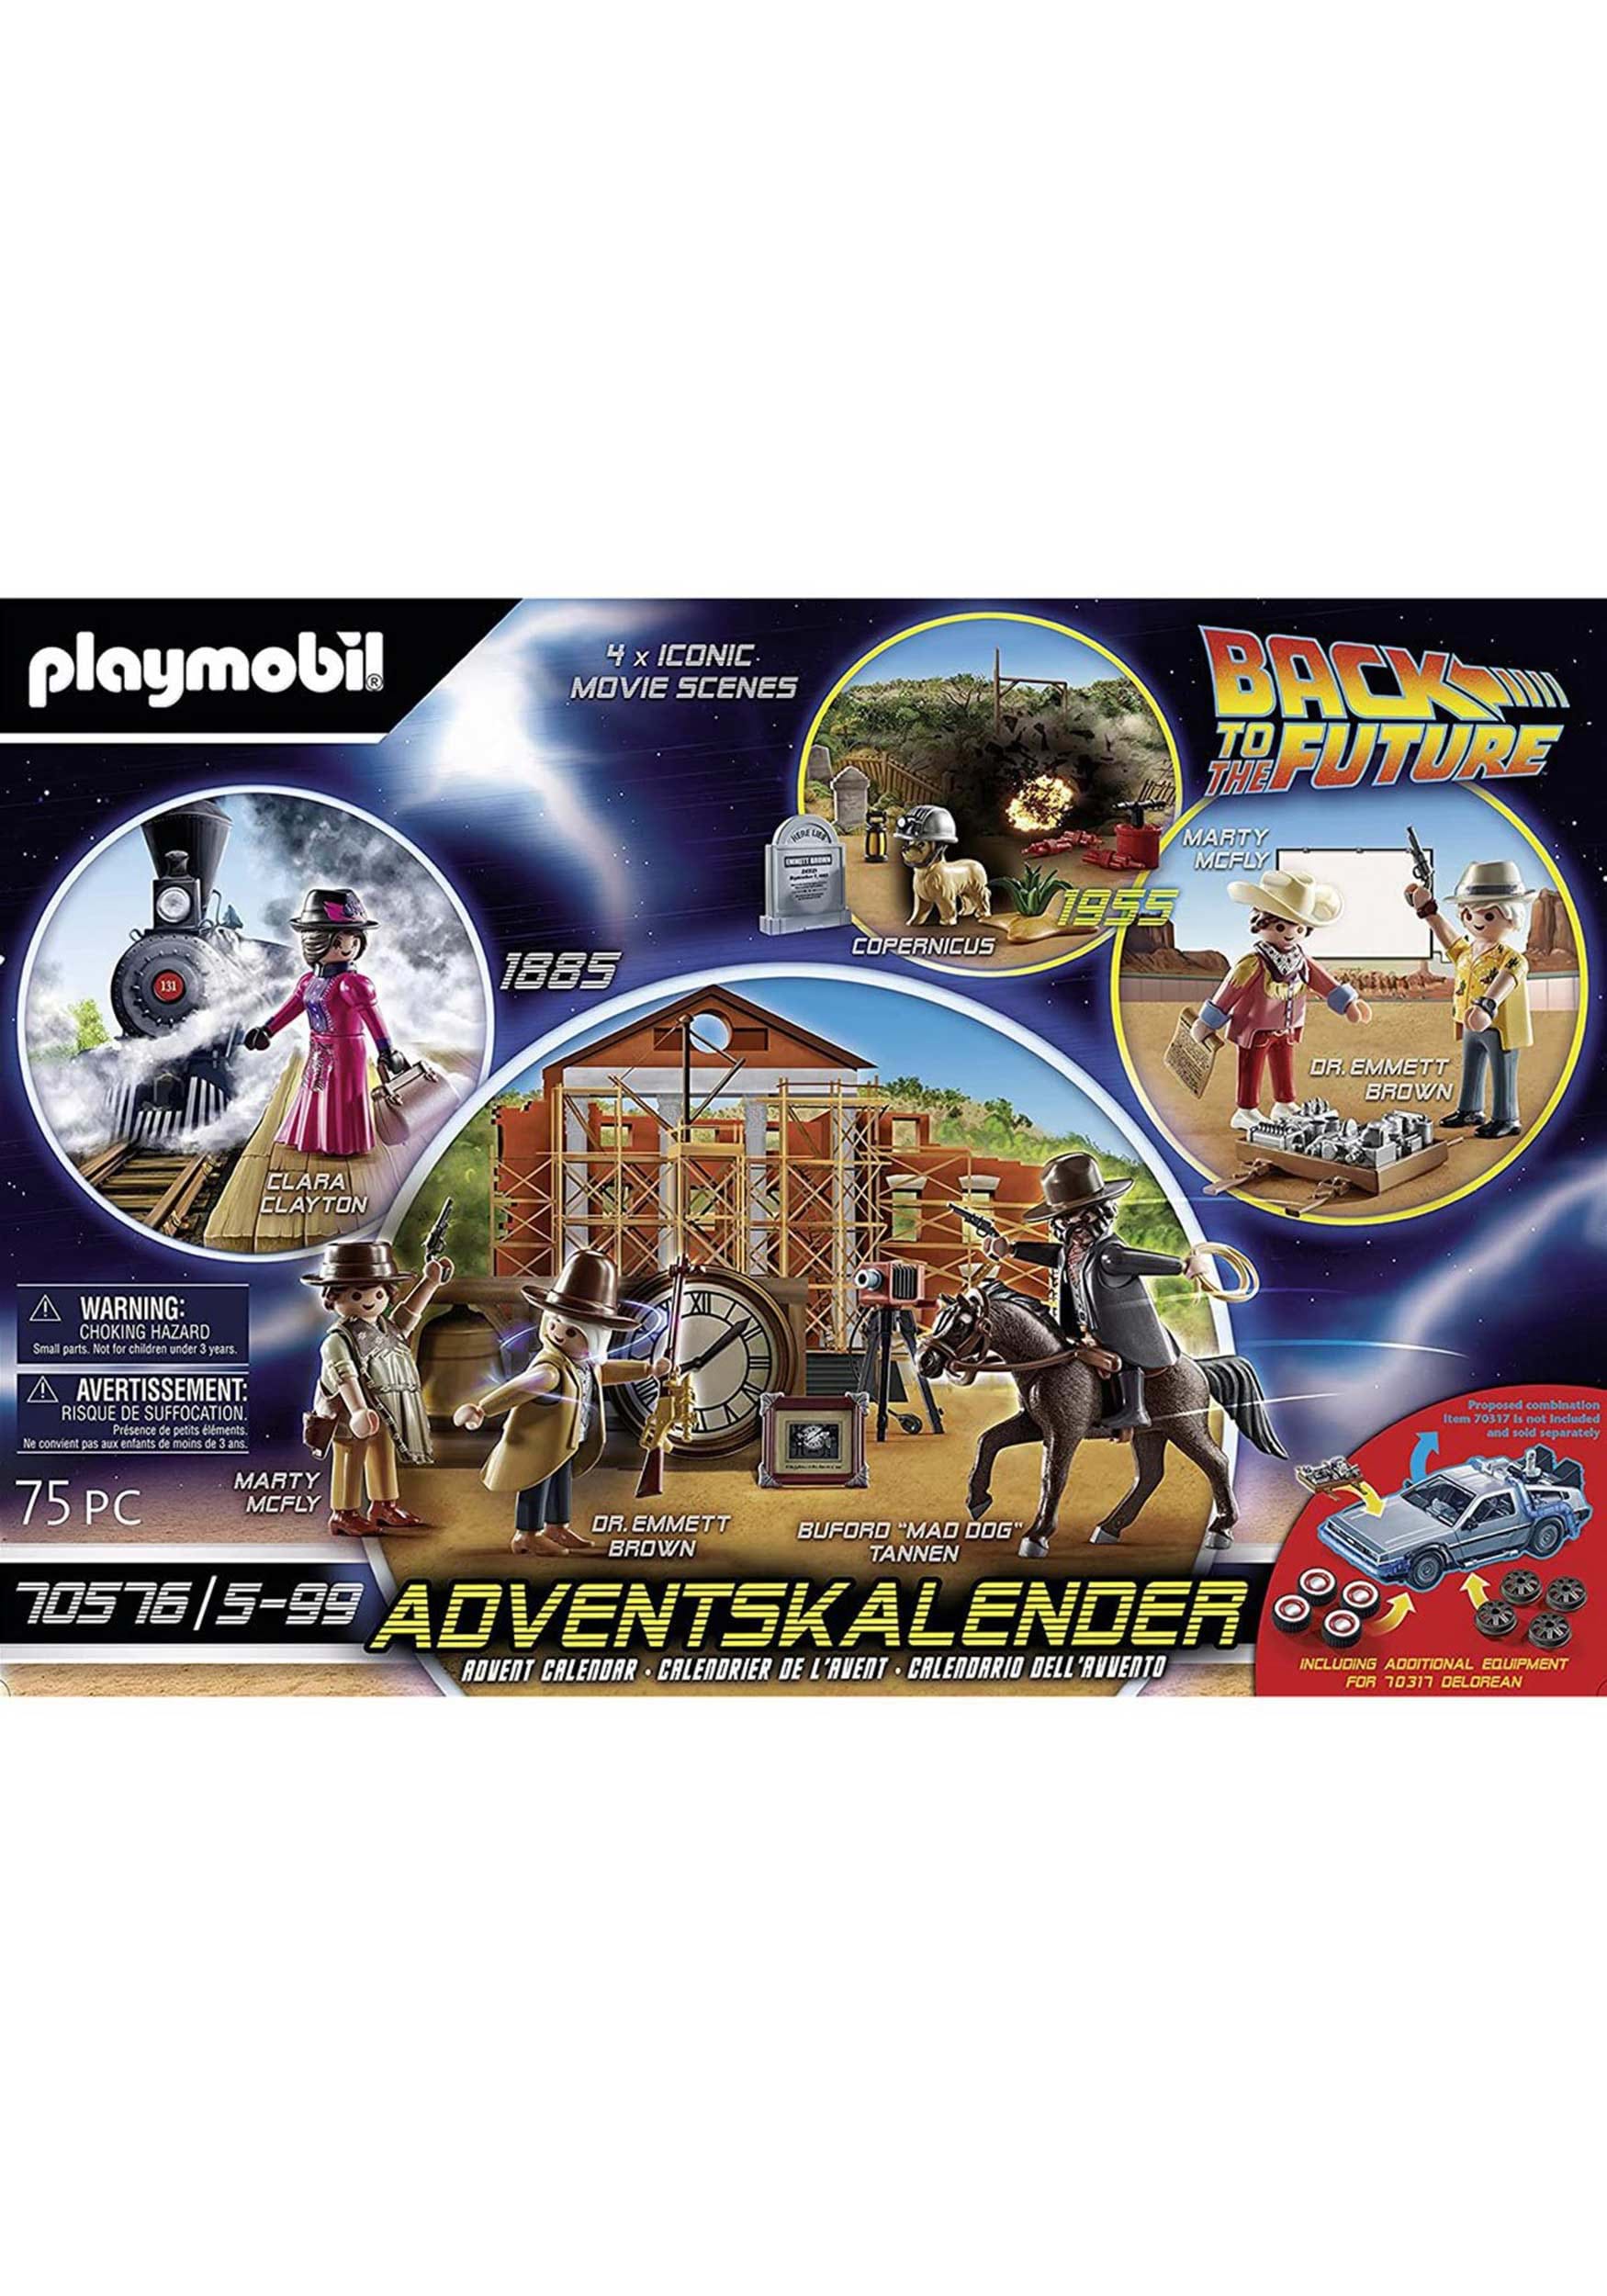 PLAYMOBIL Advent Calendar - Back to the Future Part III